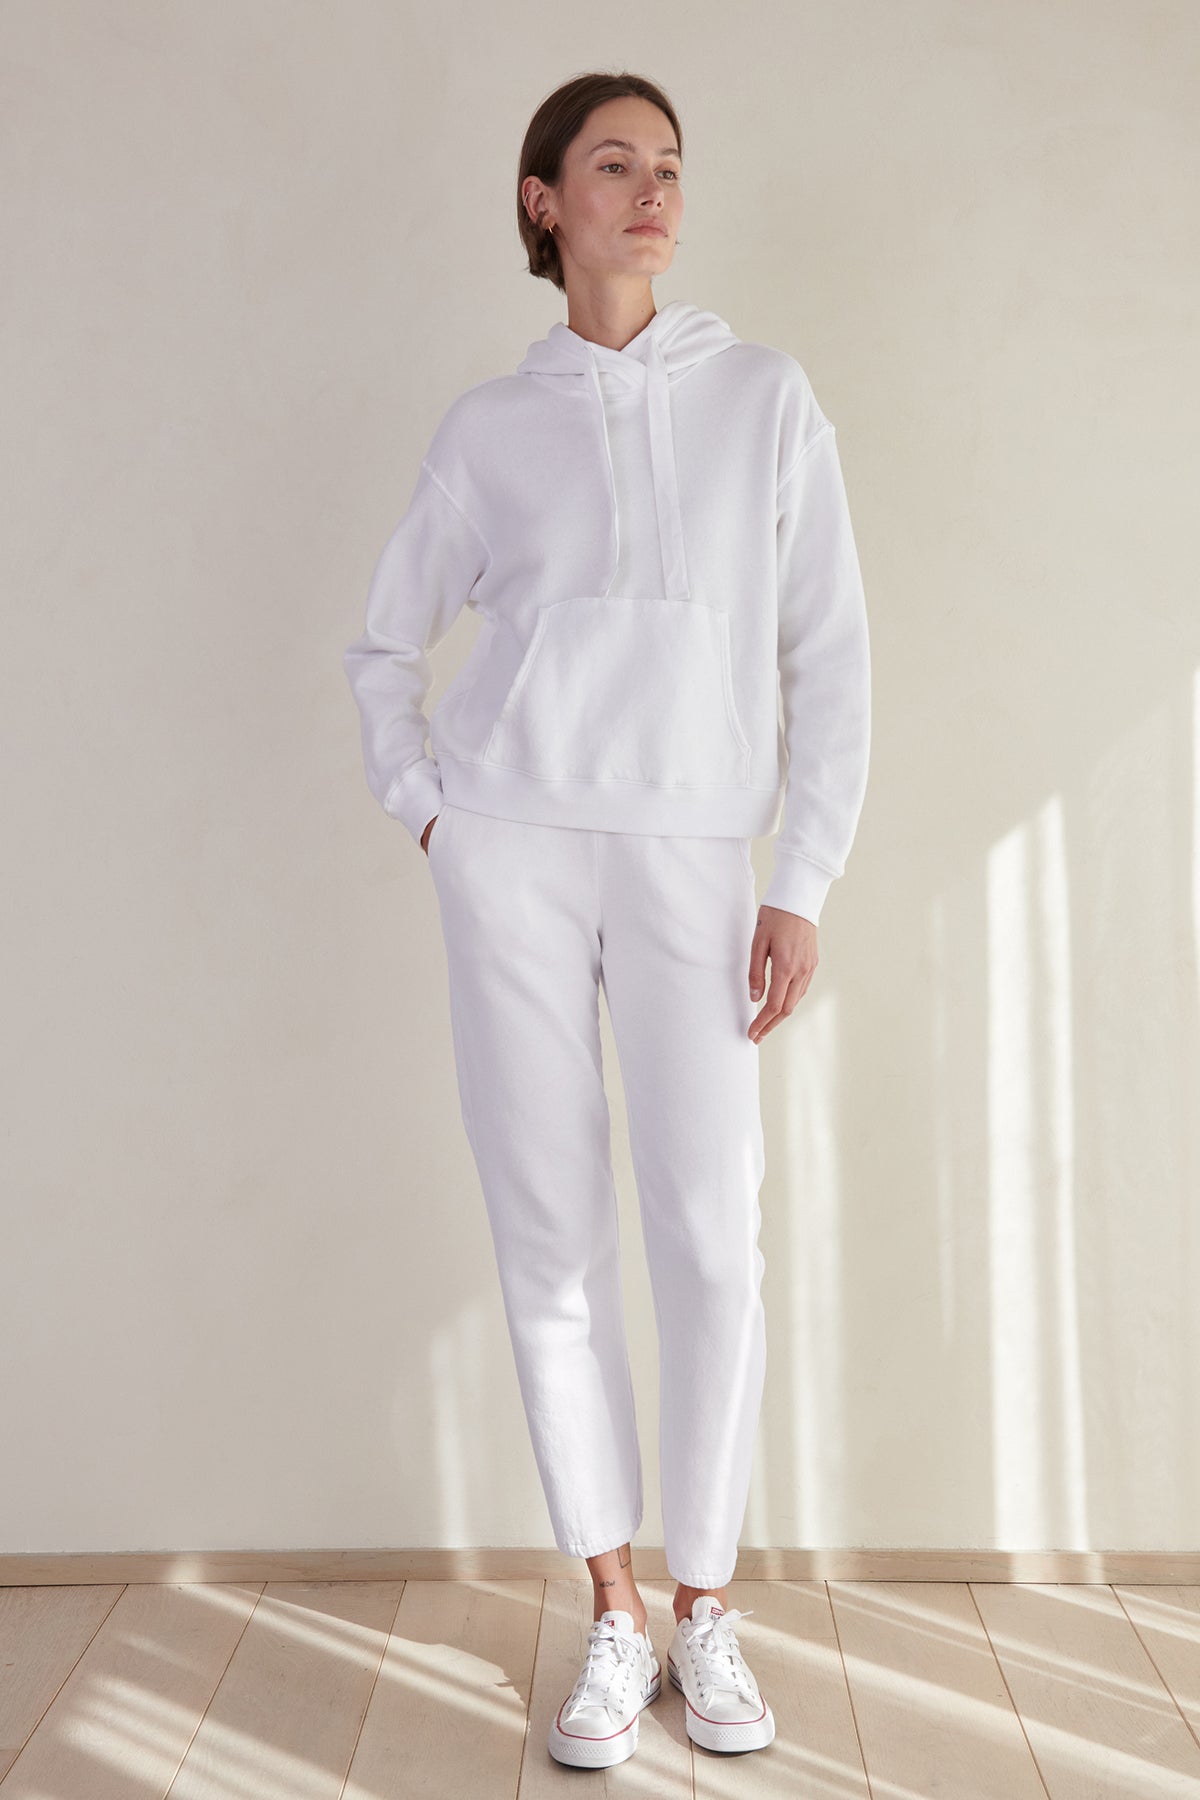 Ojai Hoodie in white with Zuma sweatpant full length front-25520631185601